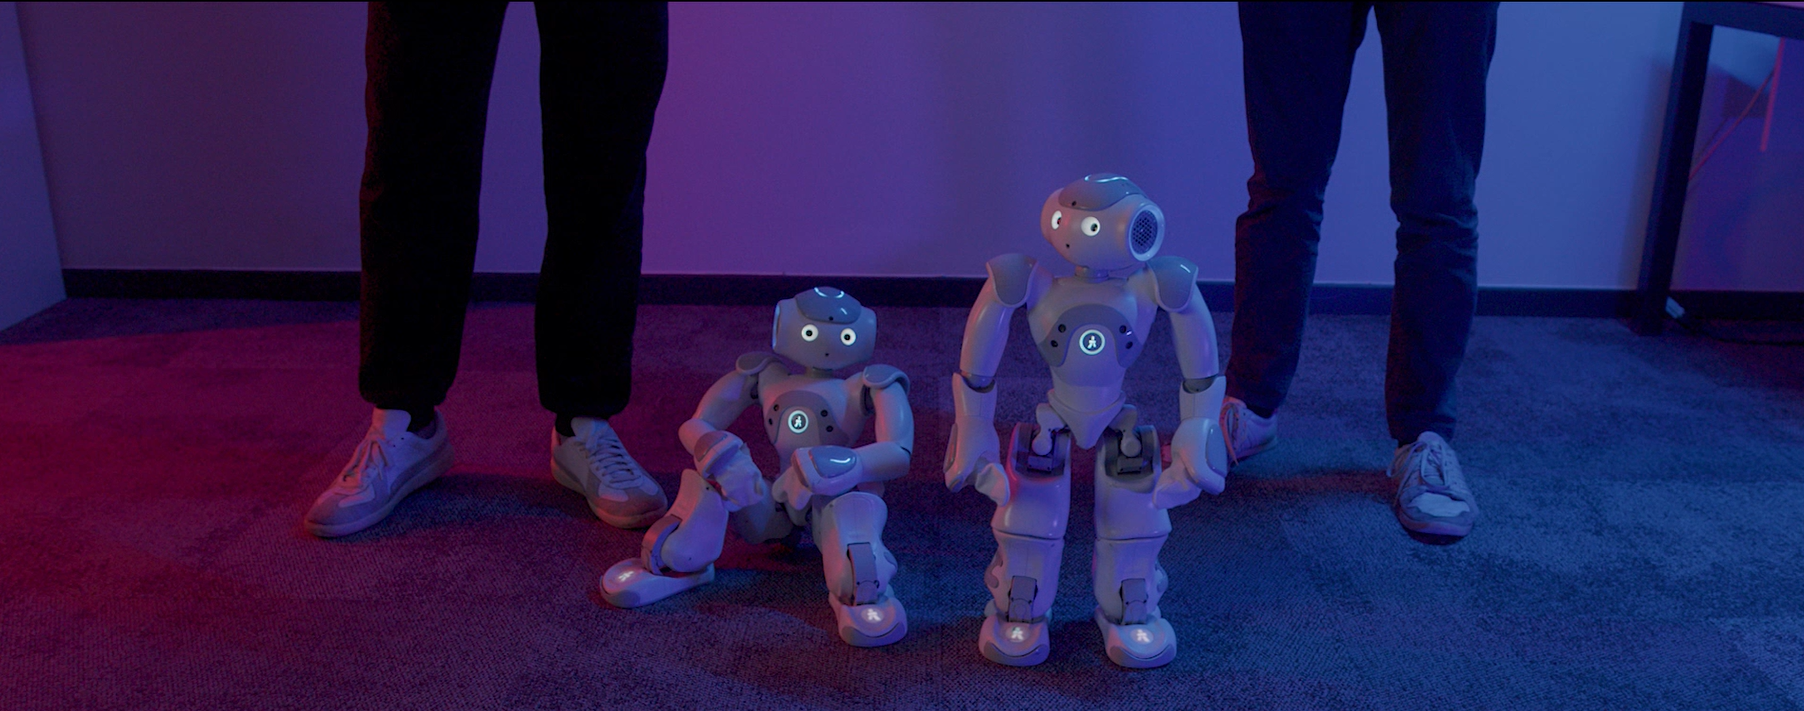 Still from look closer videos showing robots in computer science